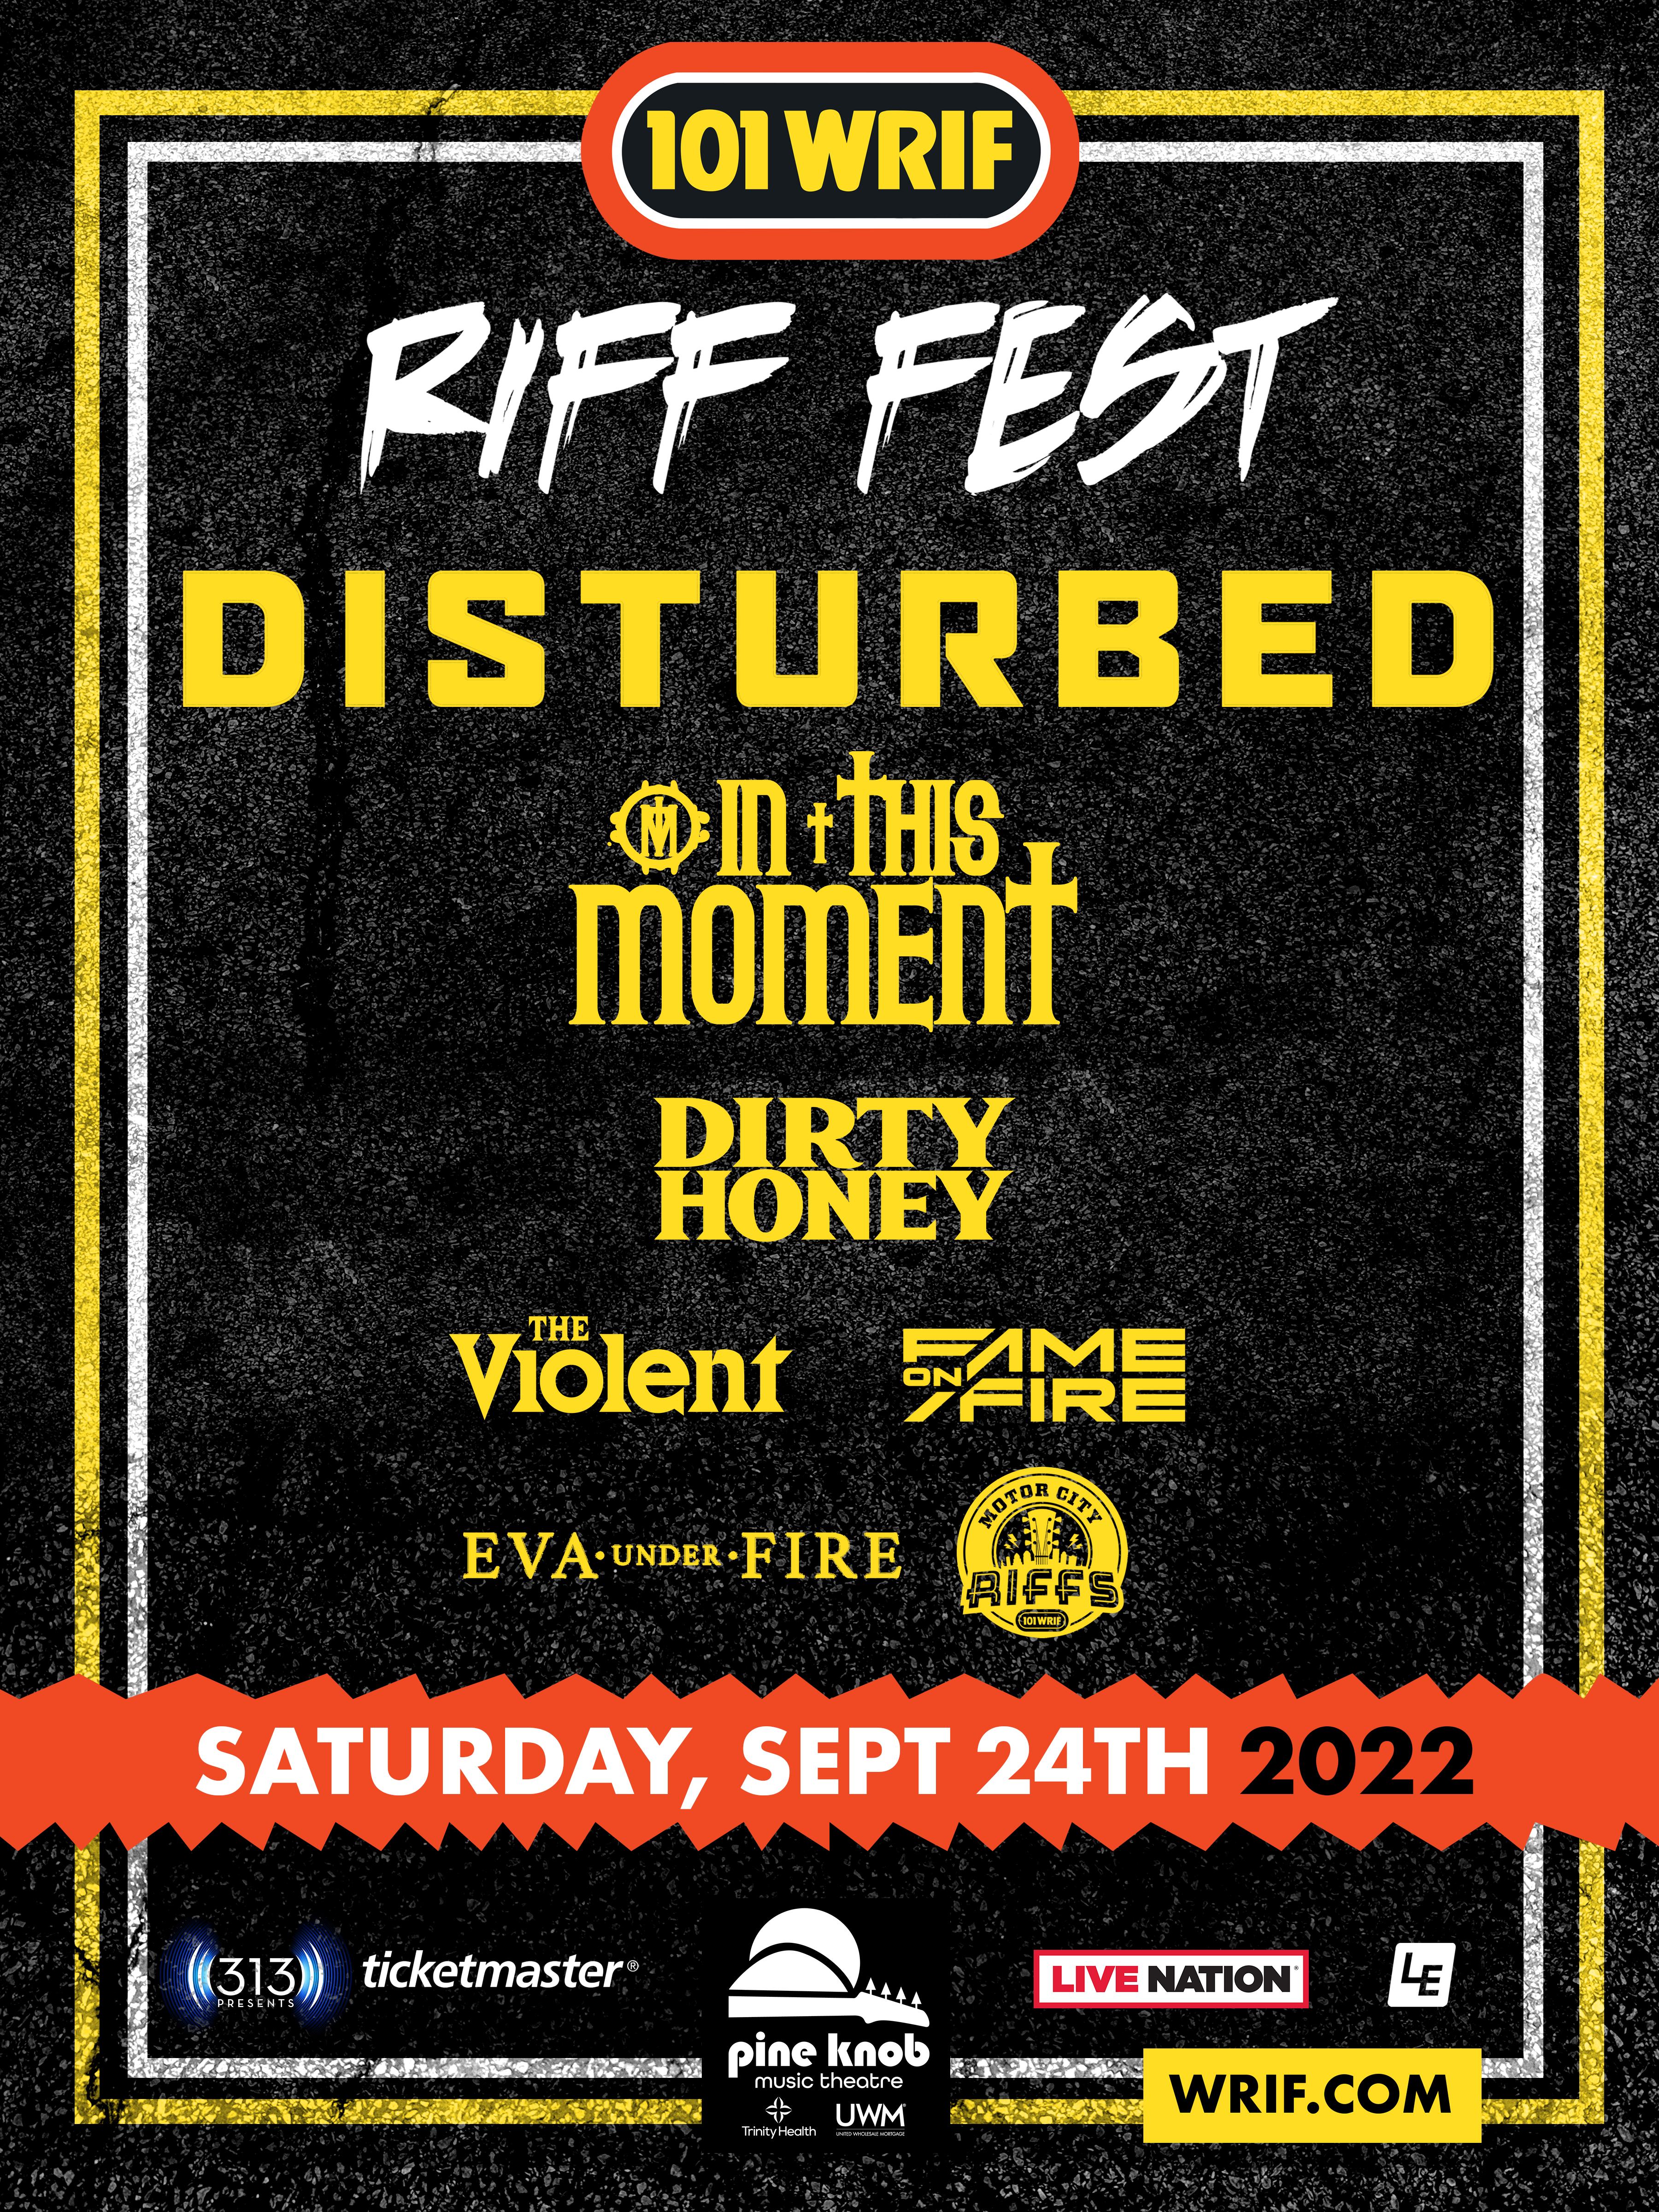 WRIF's RIFF FEST poster featuring Disturbed on September 24 in Detroit